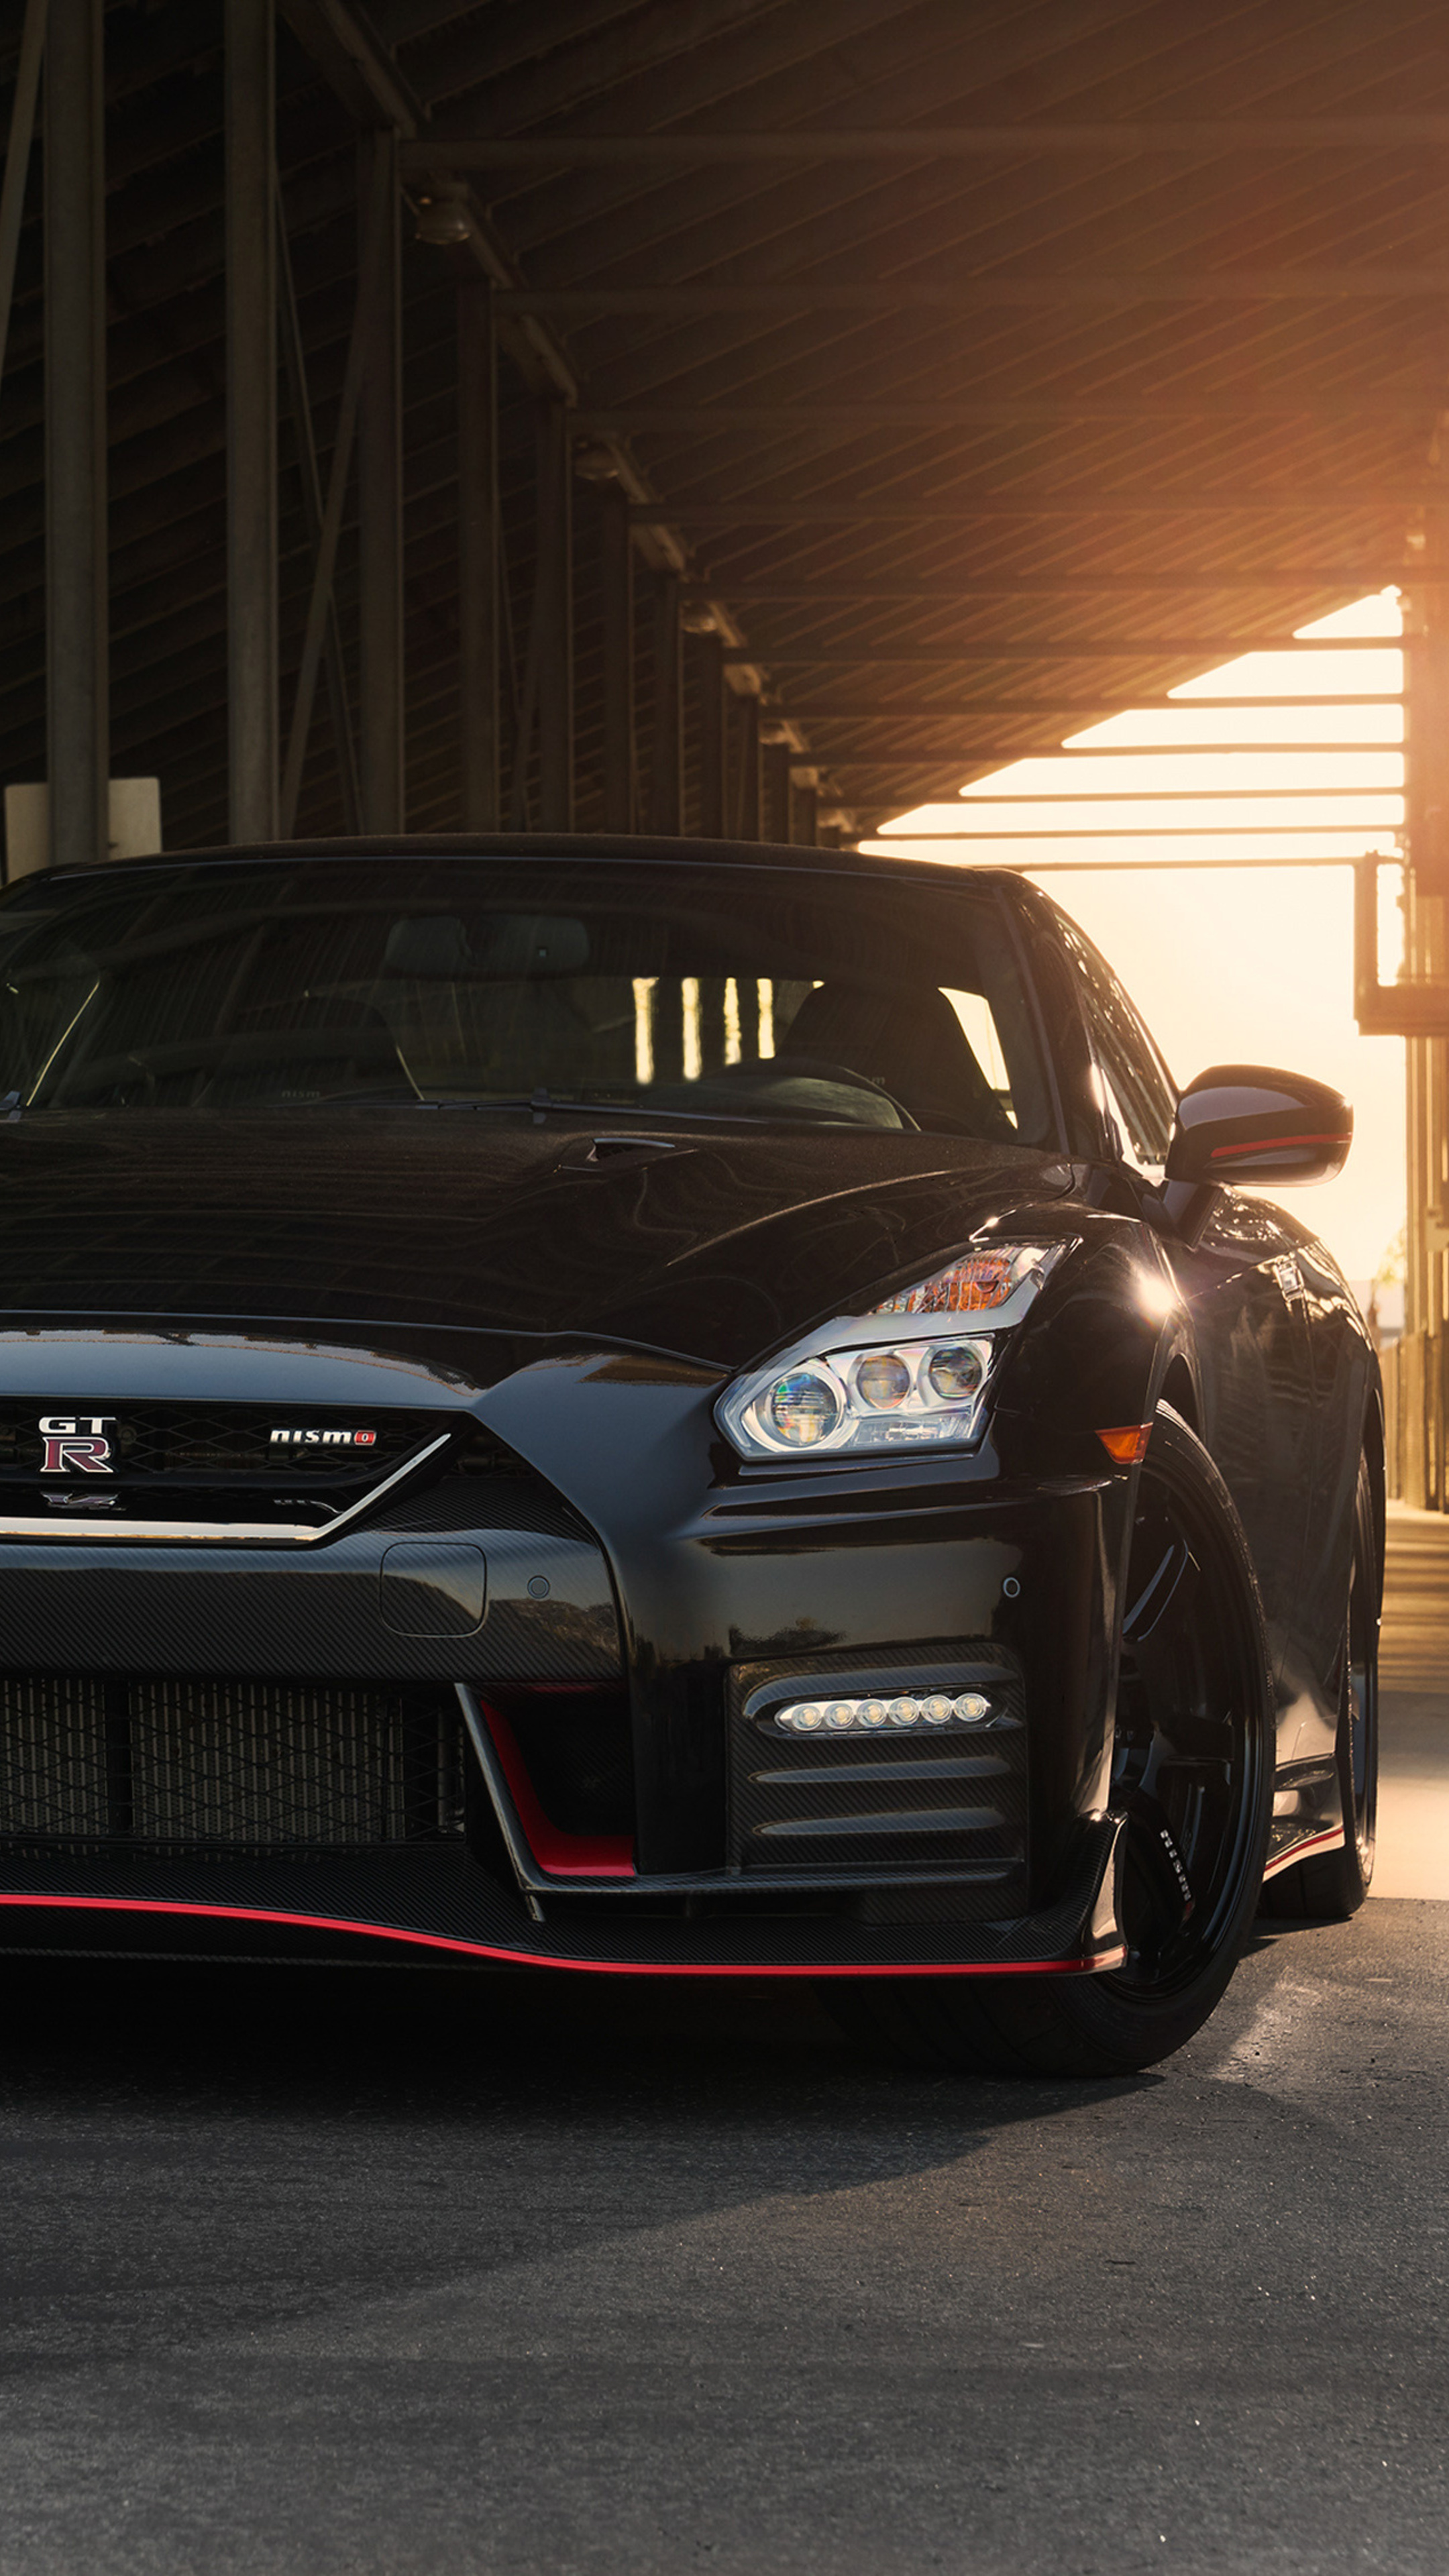 Nissan GT-R, 2018 NISMO edition, Sony Xperia exclusive, Stunning 4K visuals, 2160x3840 4K Handy